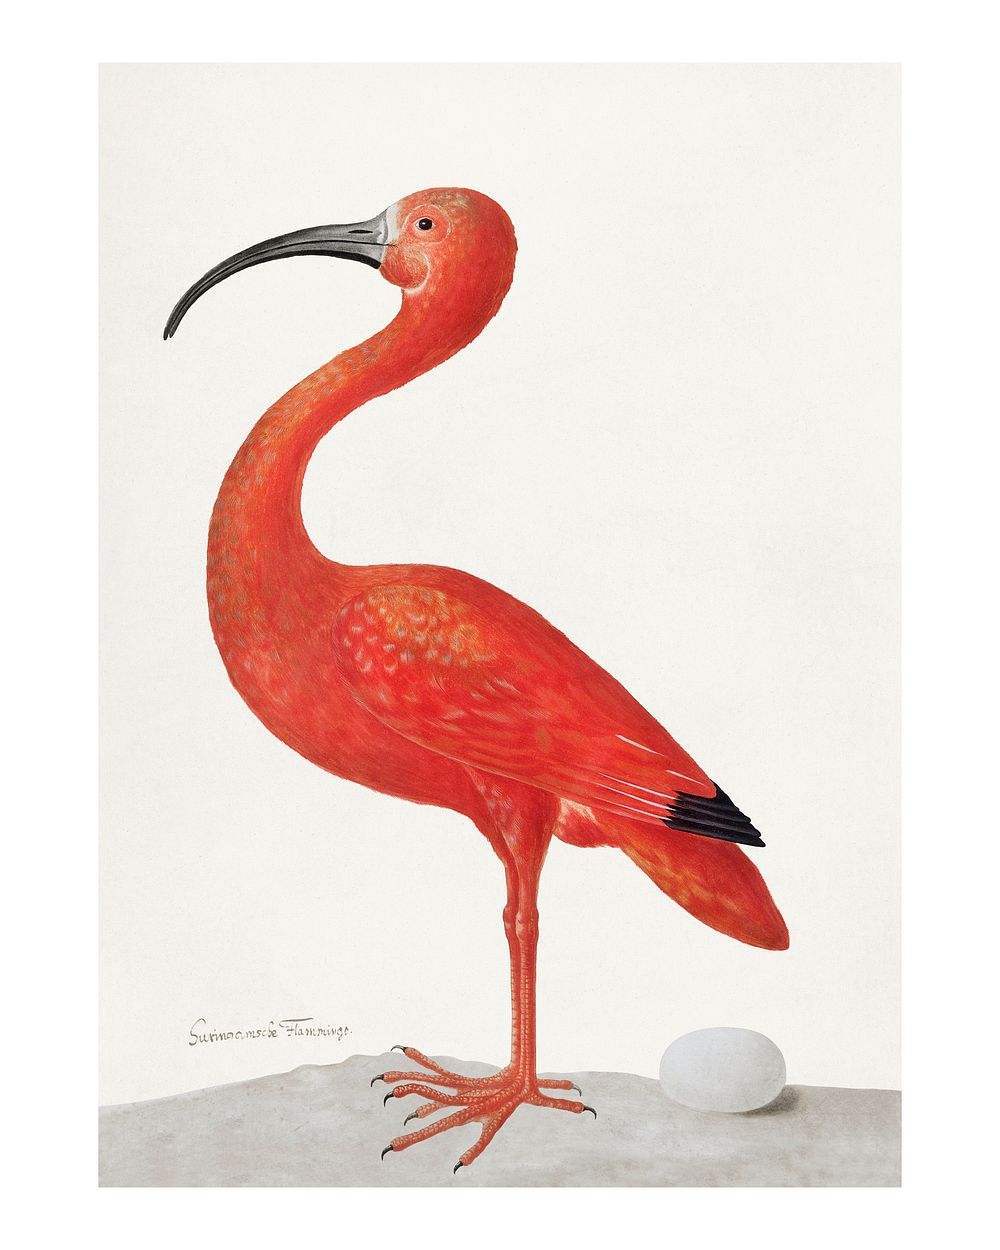 Scarlet Ibis with an Egg illustration wall art print and poster.